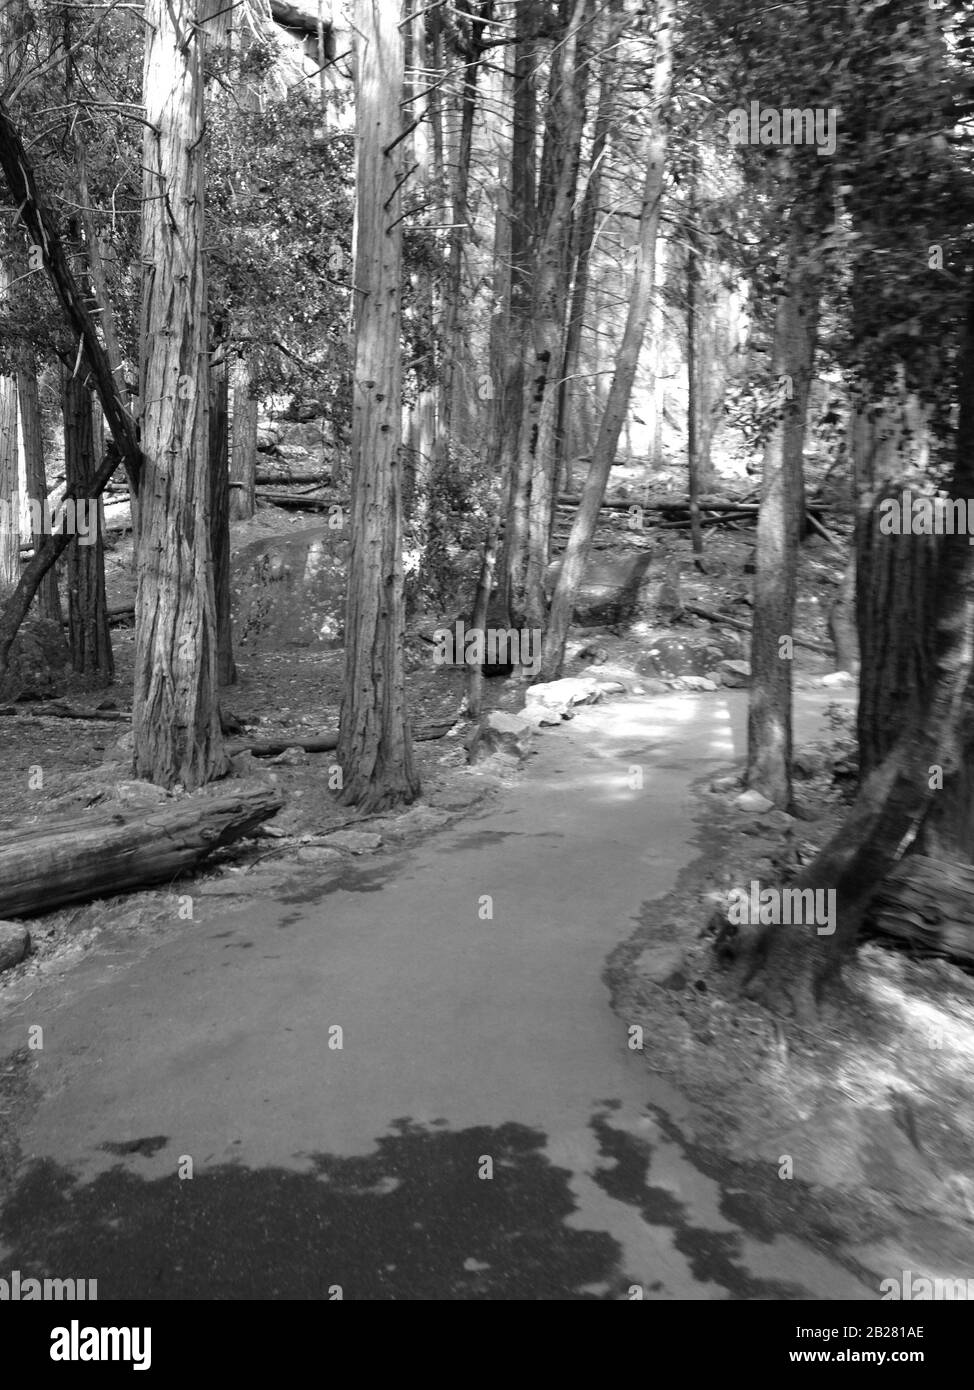 paved forest trail in Yosemite National Park, Sierra Nevada in Northern California, United States, Black and White Picture Stock Photo